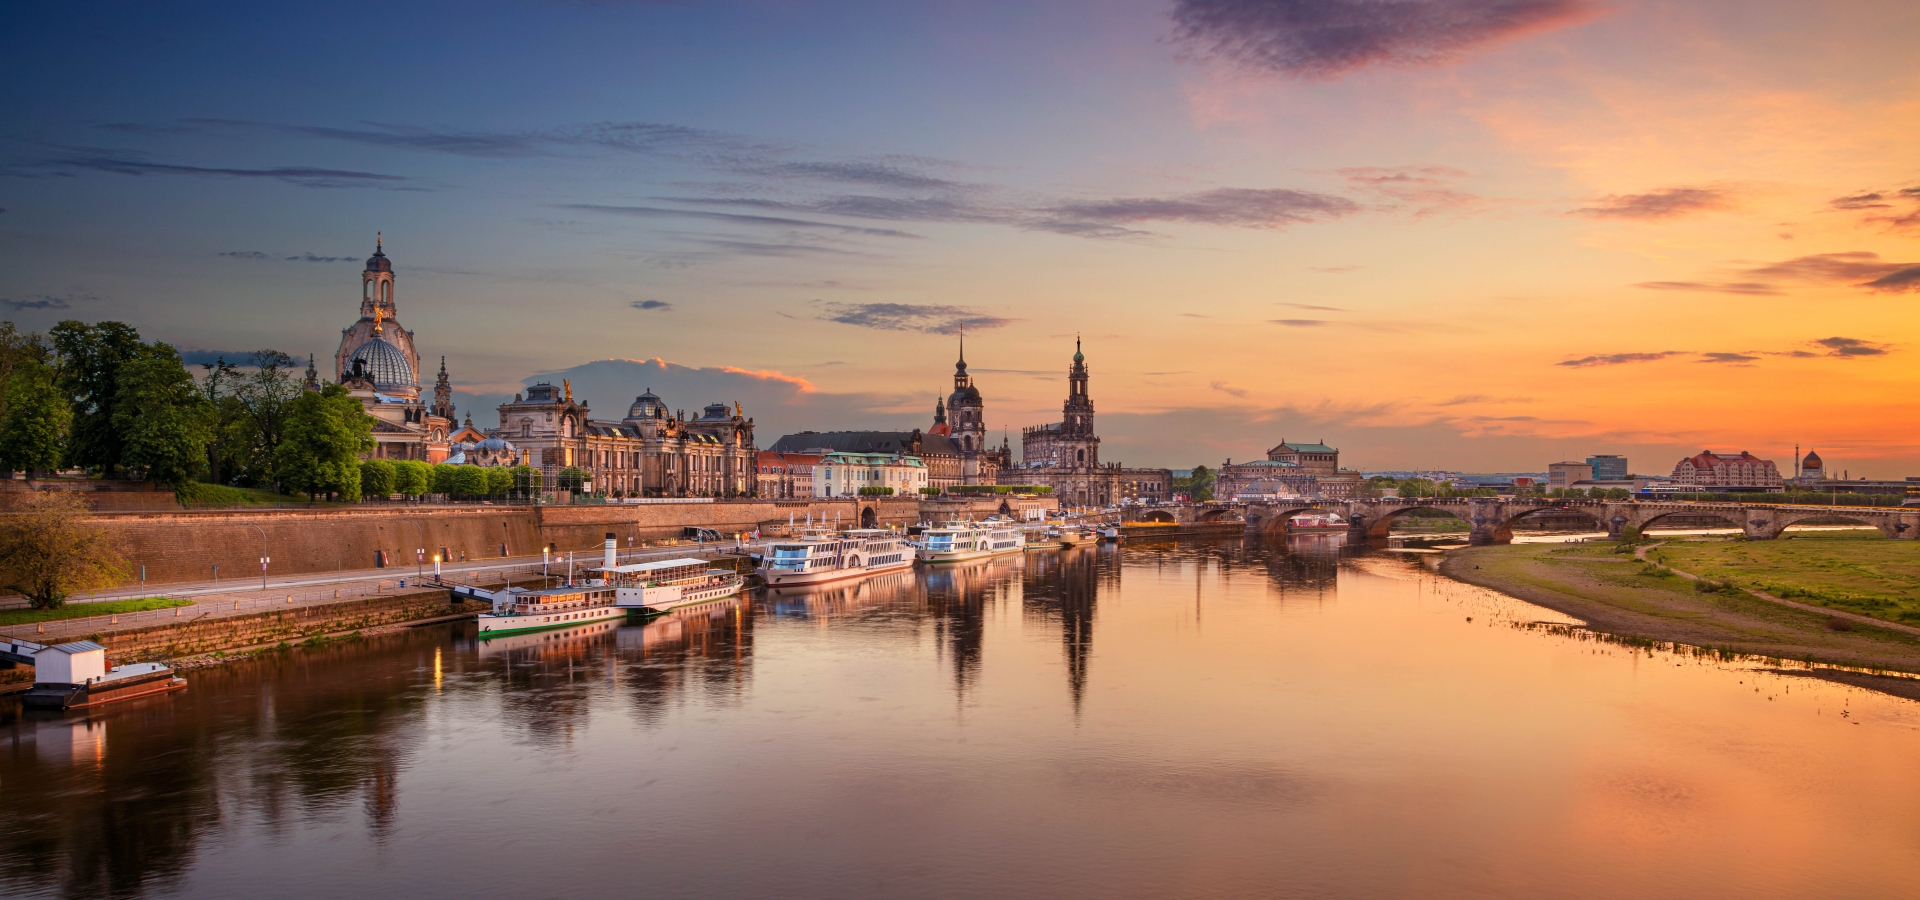 Panoramic cityscape image of Dresden, Germany with reflection of the city in the Elbe river, during sunset.